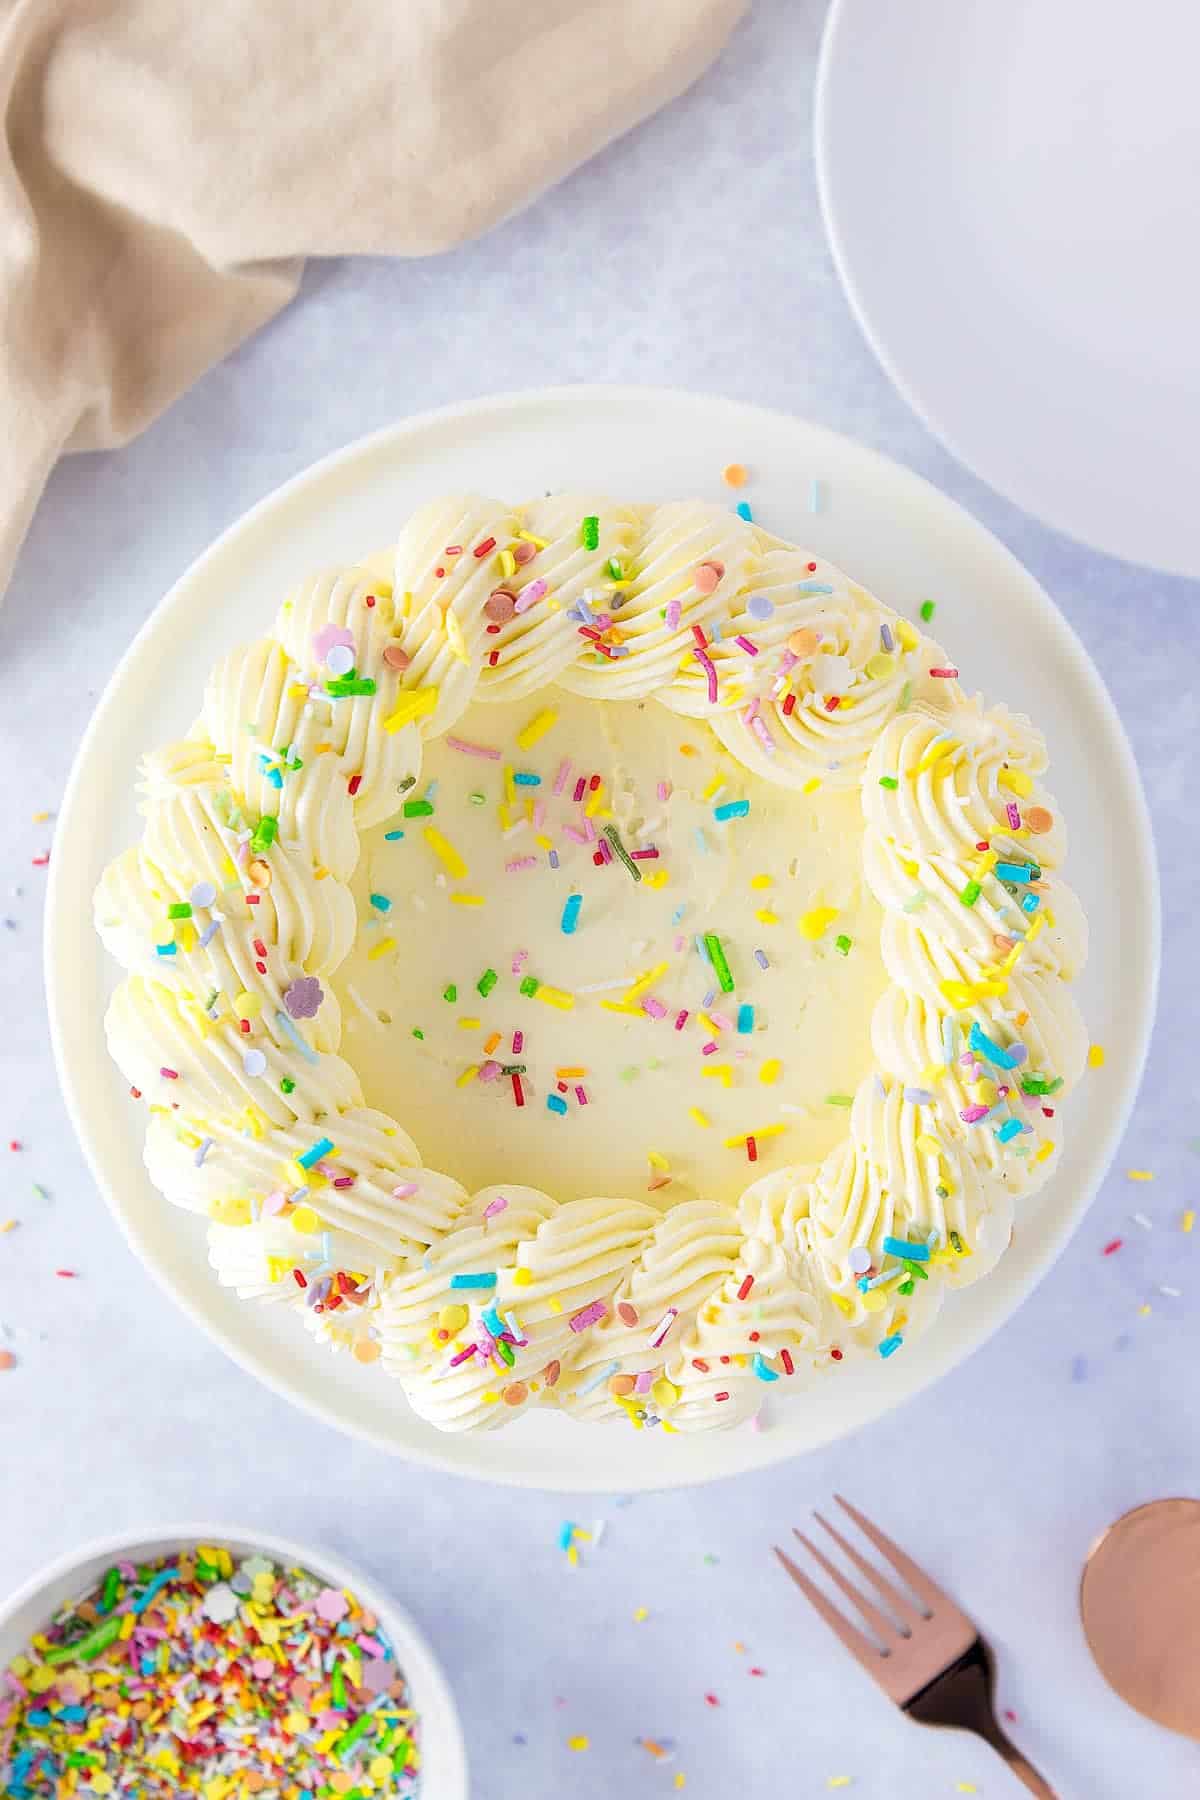 Looking down on top of a white cake, rainbow sprinkles are scattered on top